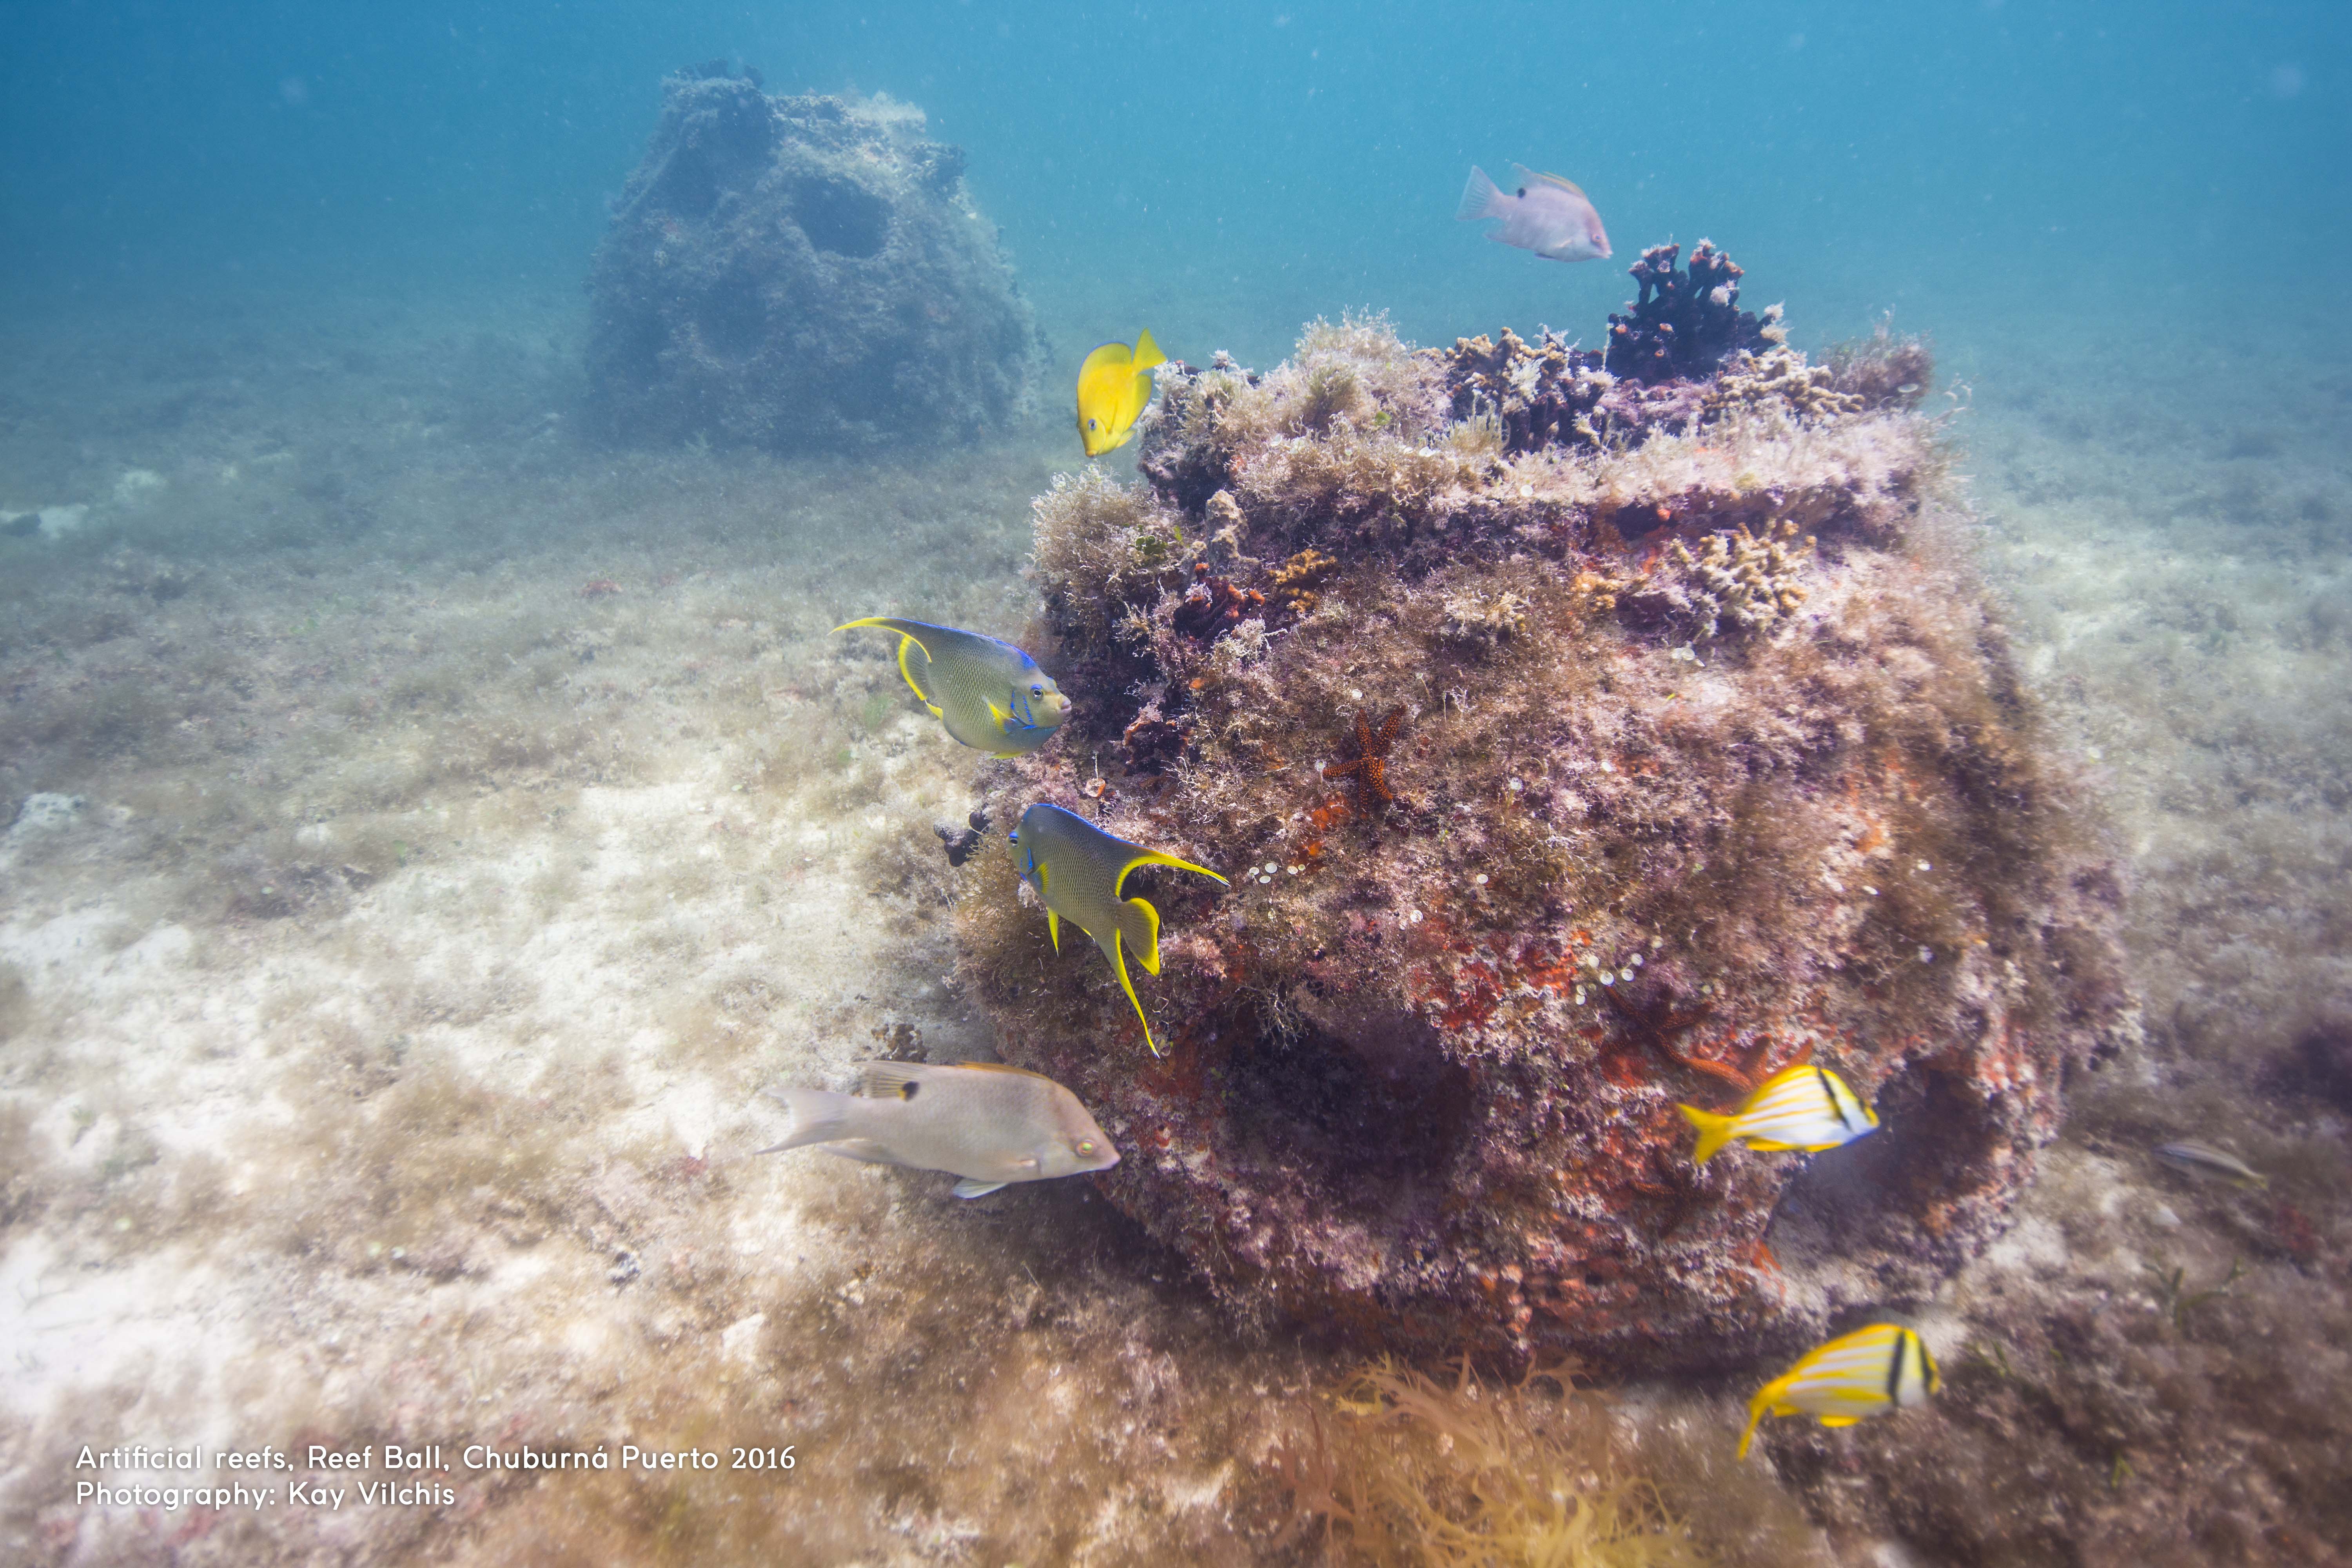 Creating an ecosystem with artificial reefs